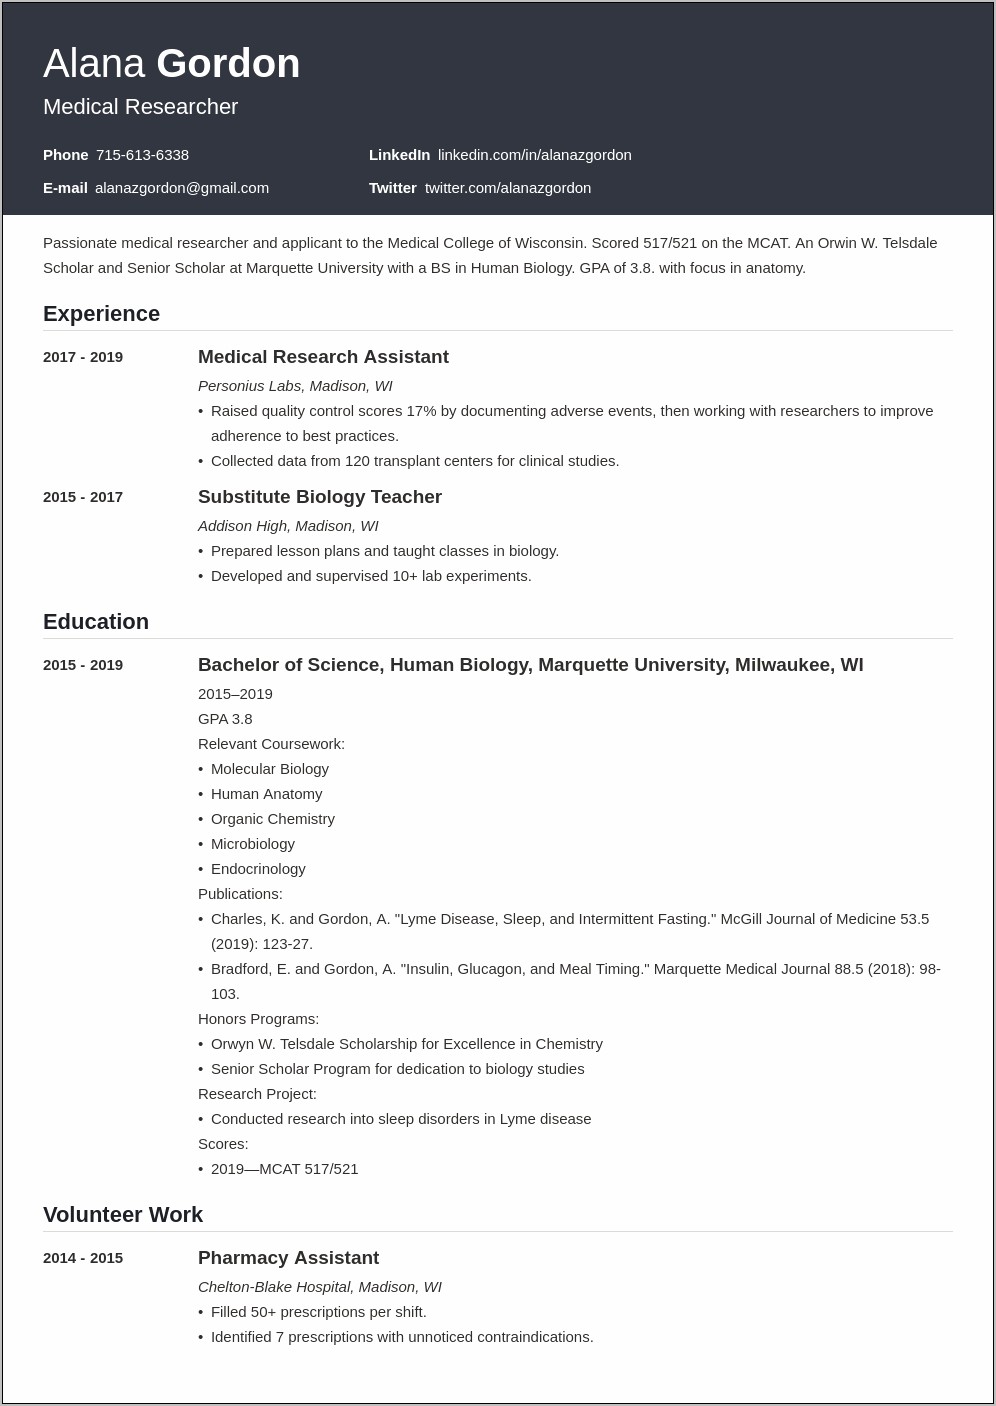 Resume Format For Students Applying For Medical School